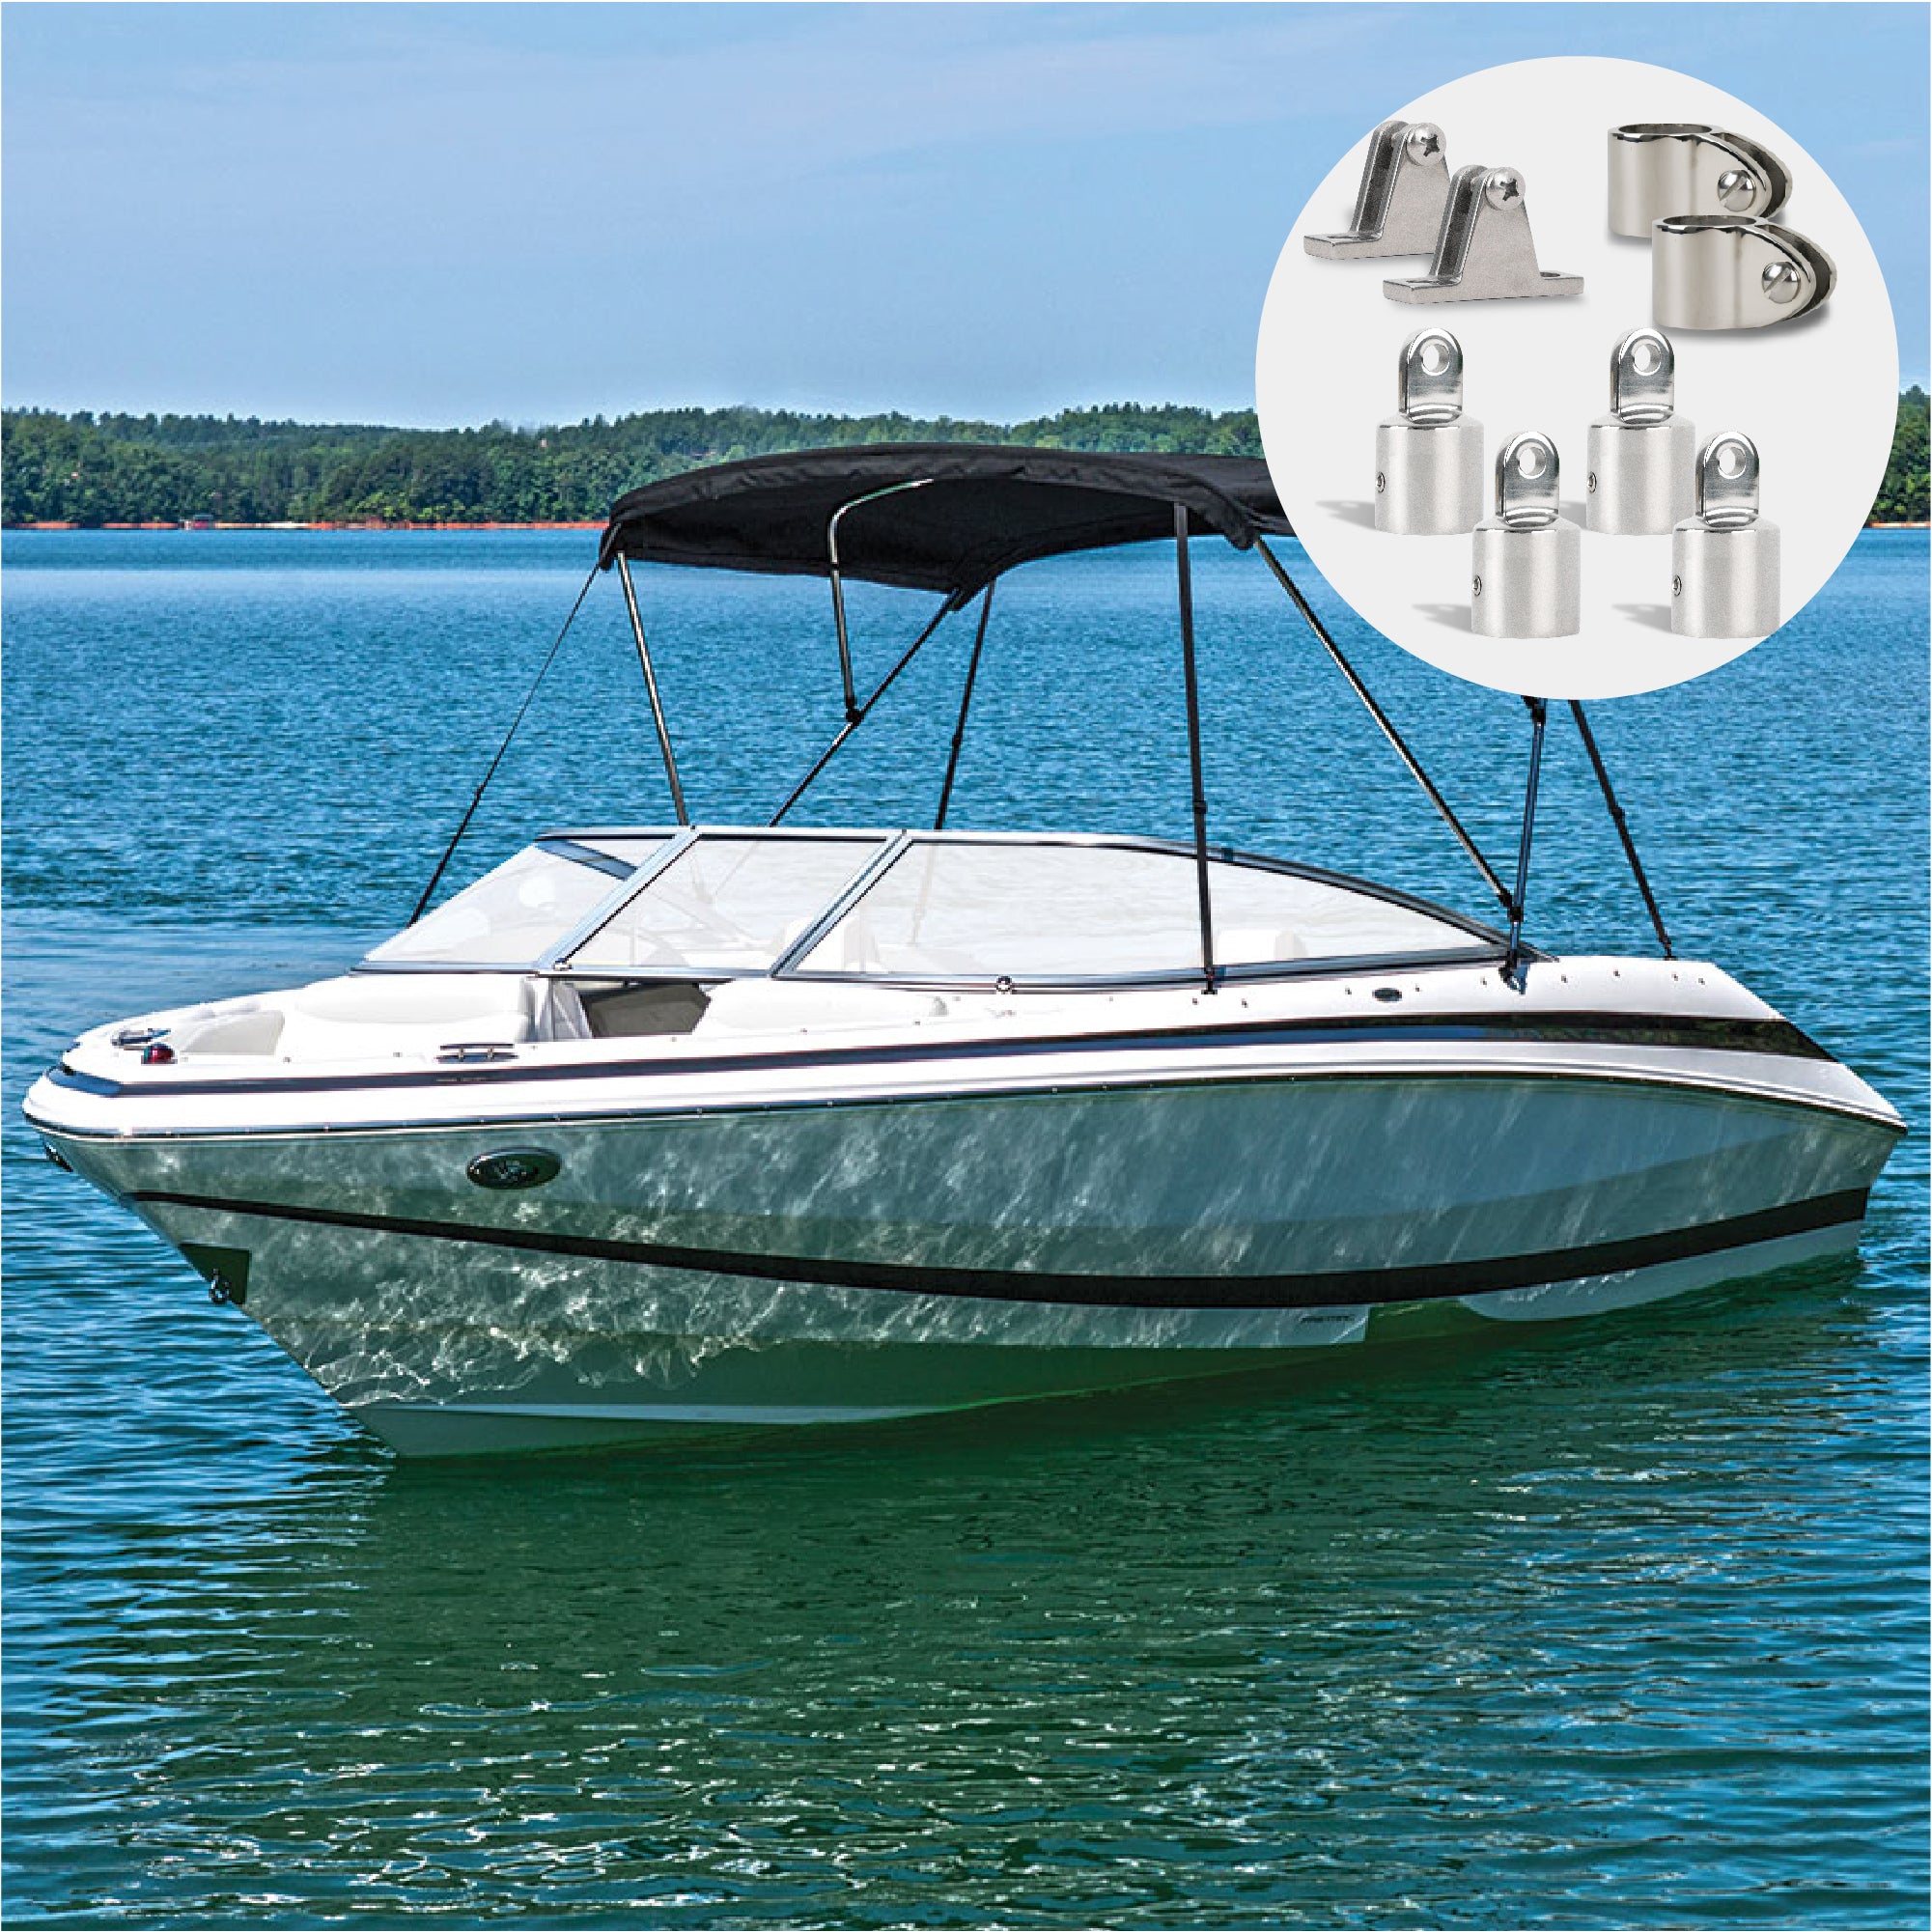 2 Bow Bimini Top Set 8 Piece, 7/8" AISI316 Stainless Steel - FO367-C2